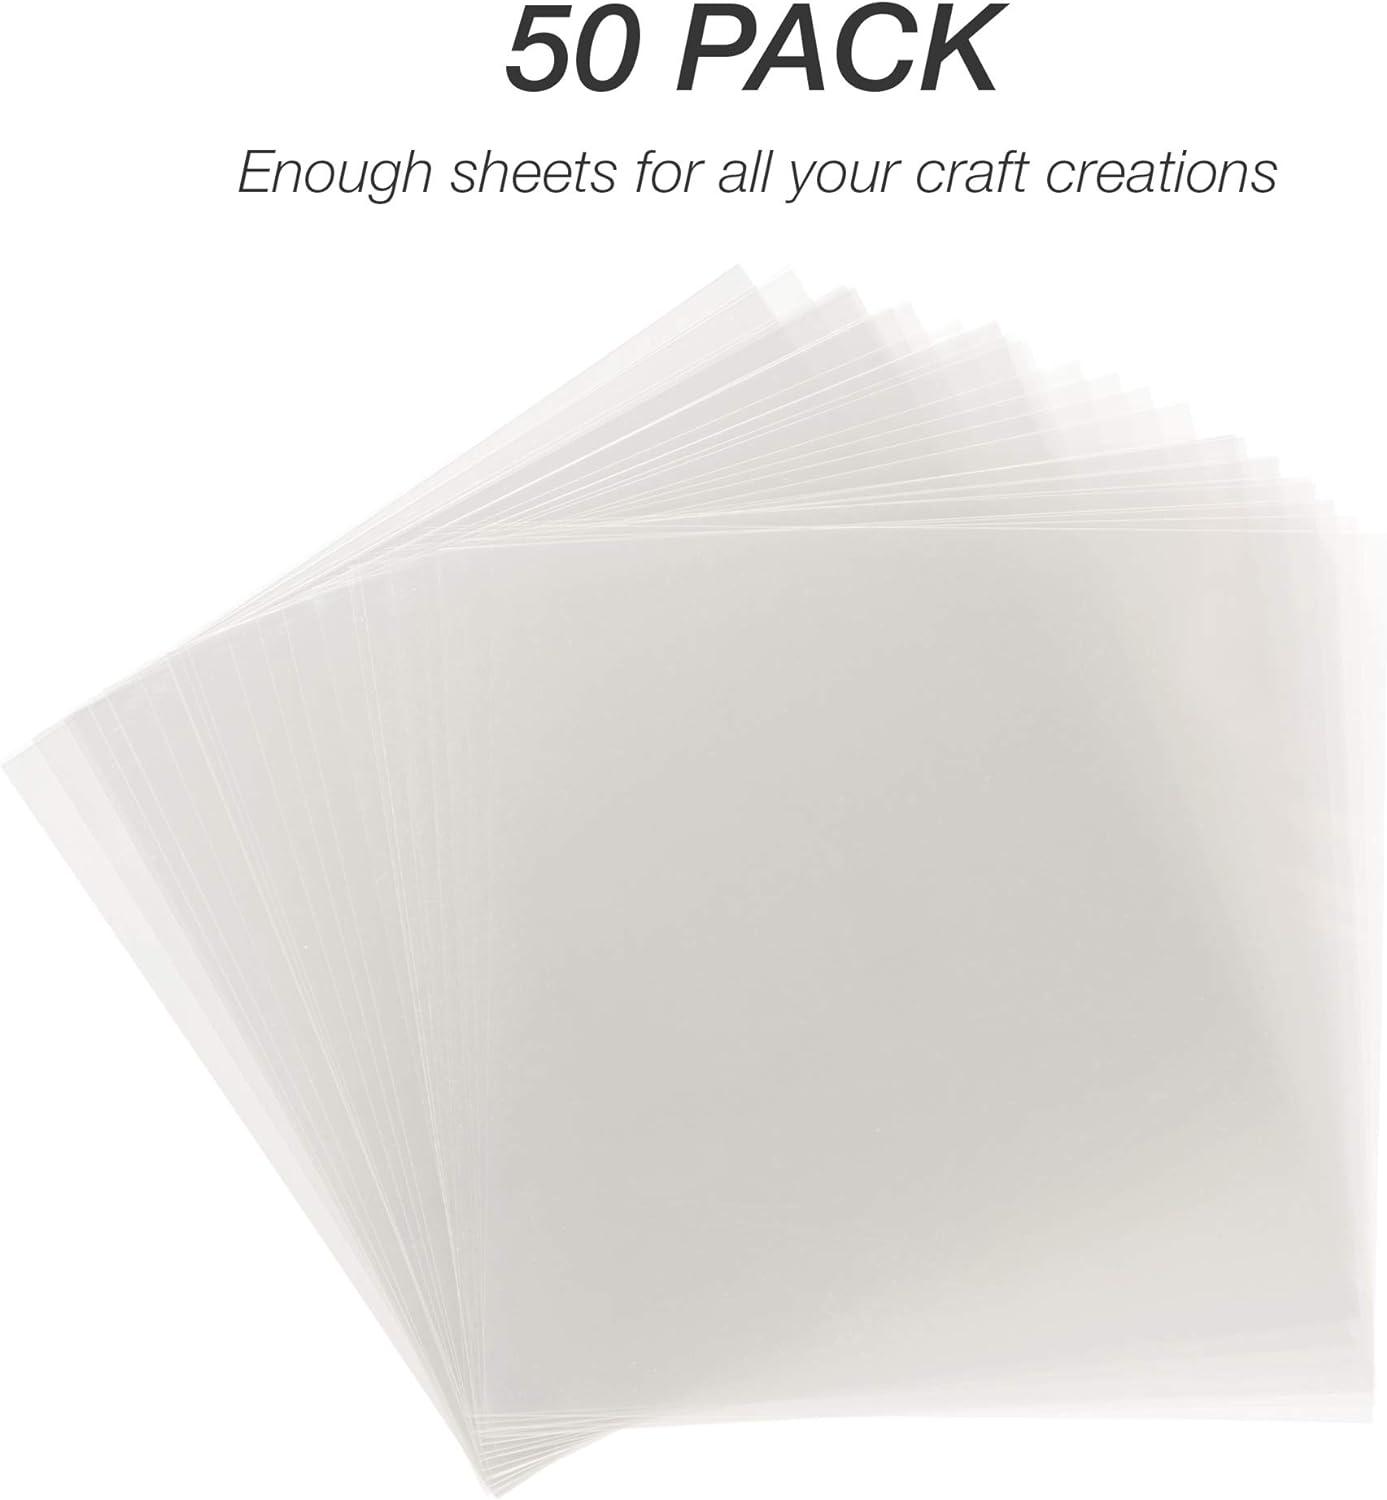 Samsill 50 Pack 12 x 12 .007 Clear Craft Plastic Sheets Compatible with  Cricut Stencils Cards Journals Crafts 3D Embellishments Clear Craft Plastic.